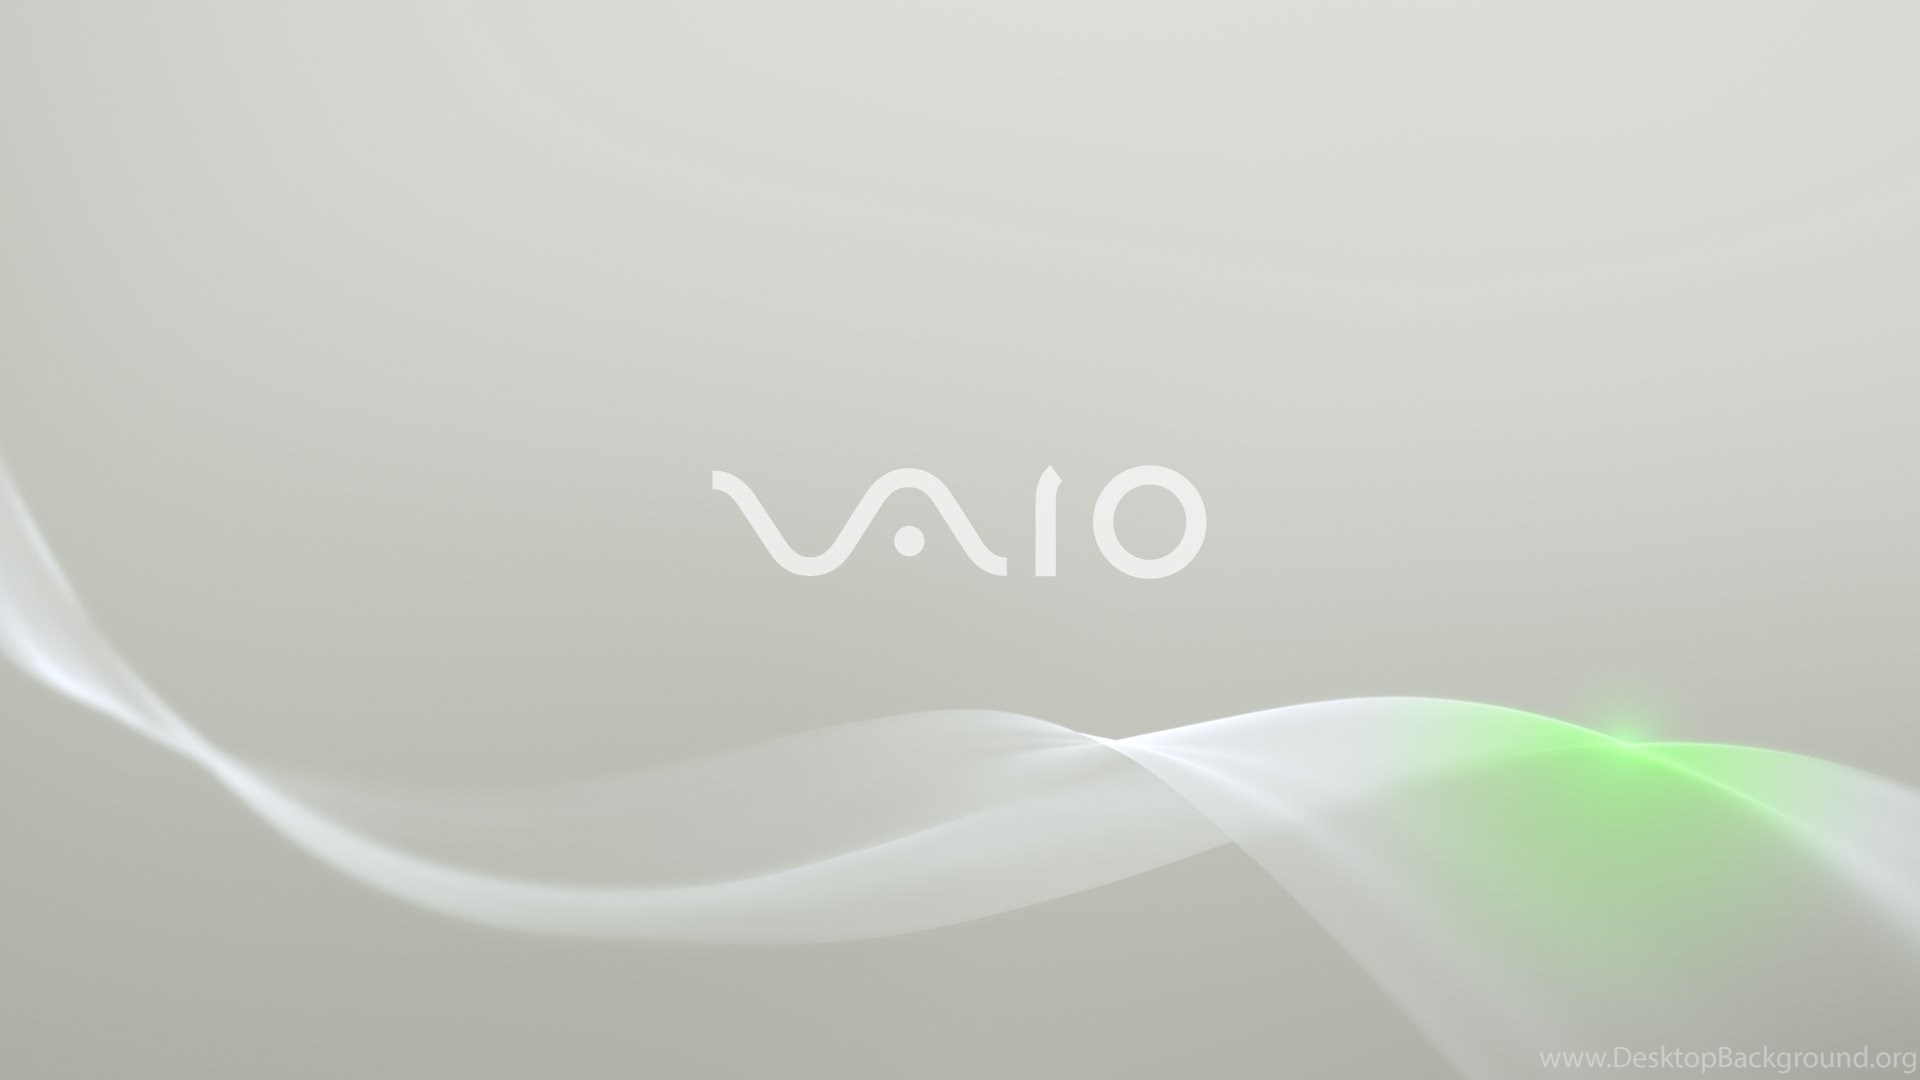 Hd Sony Vaio Wallpapers Amp Vaio Backgrounds For Free Download 7 Desktop Background